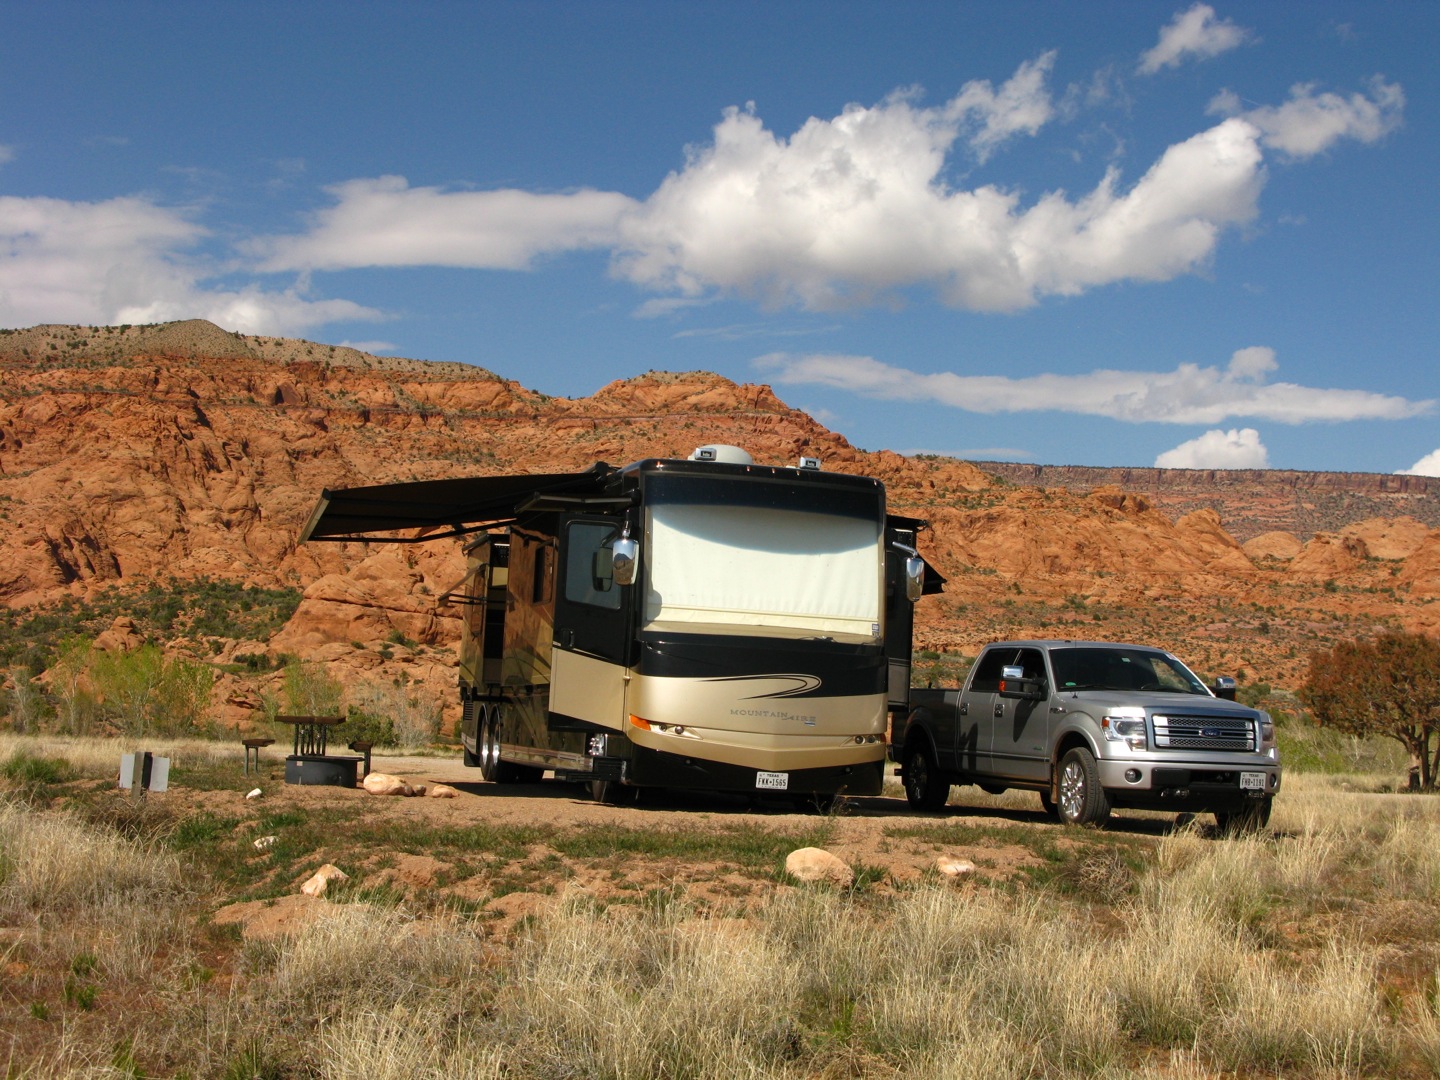 Boondocking on BLM land near Moab, UT. Photo by Scottybdivin on iRV2 Forums